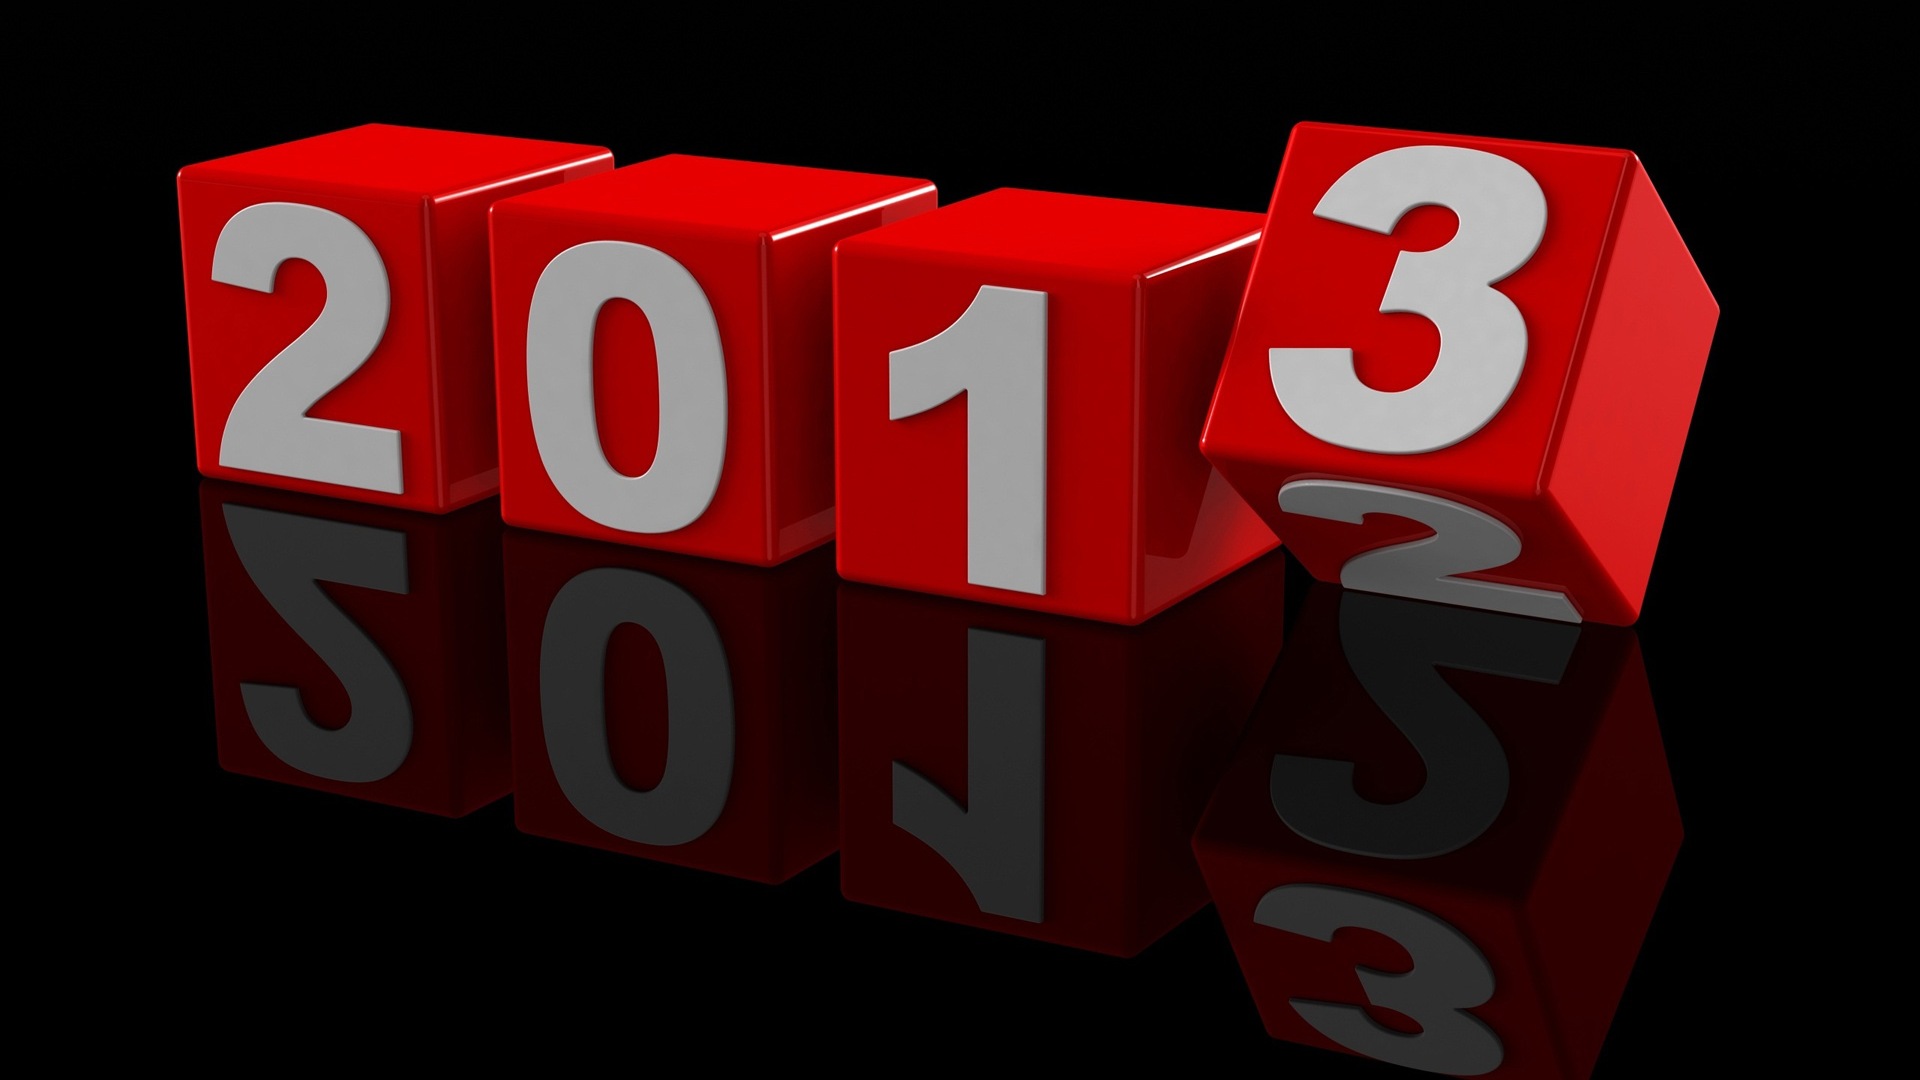 2013 Happy New Year HD wallpapers #10 - 1920x1080